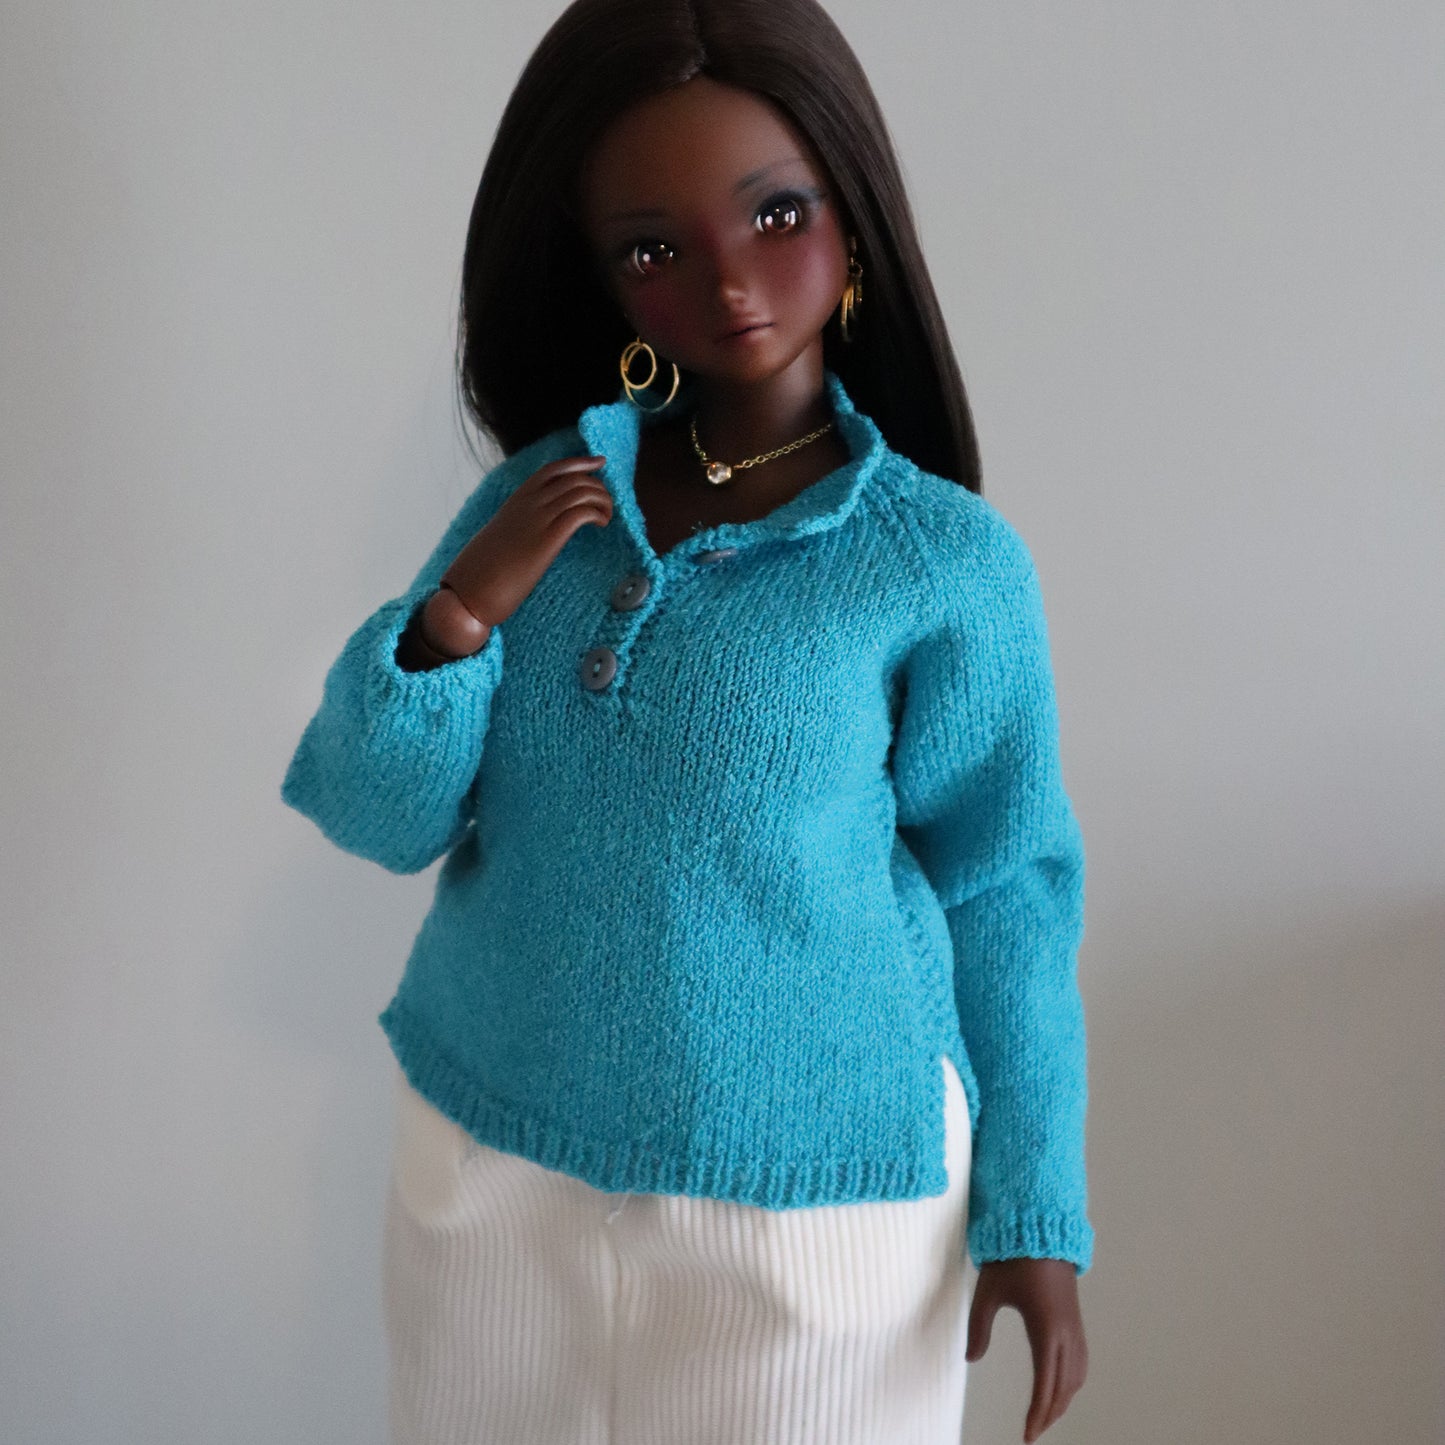 Digital Pattern for Pear Smartdoll - Collared Knitted Pullover